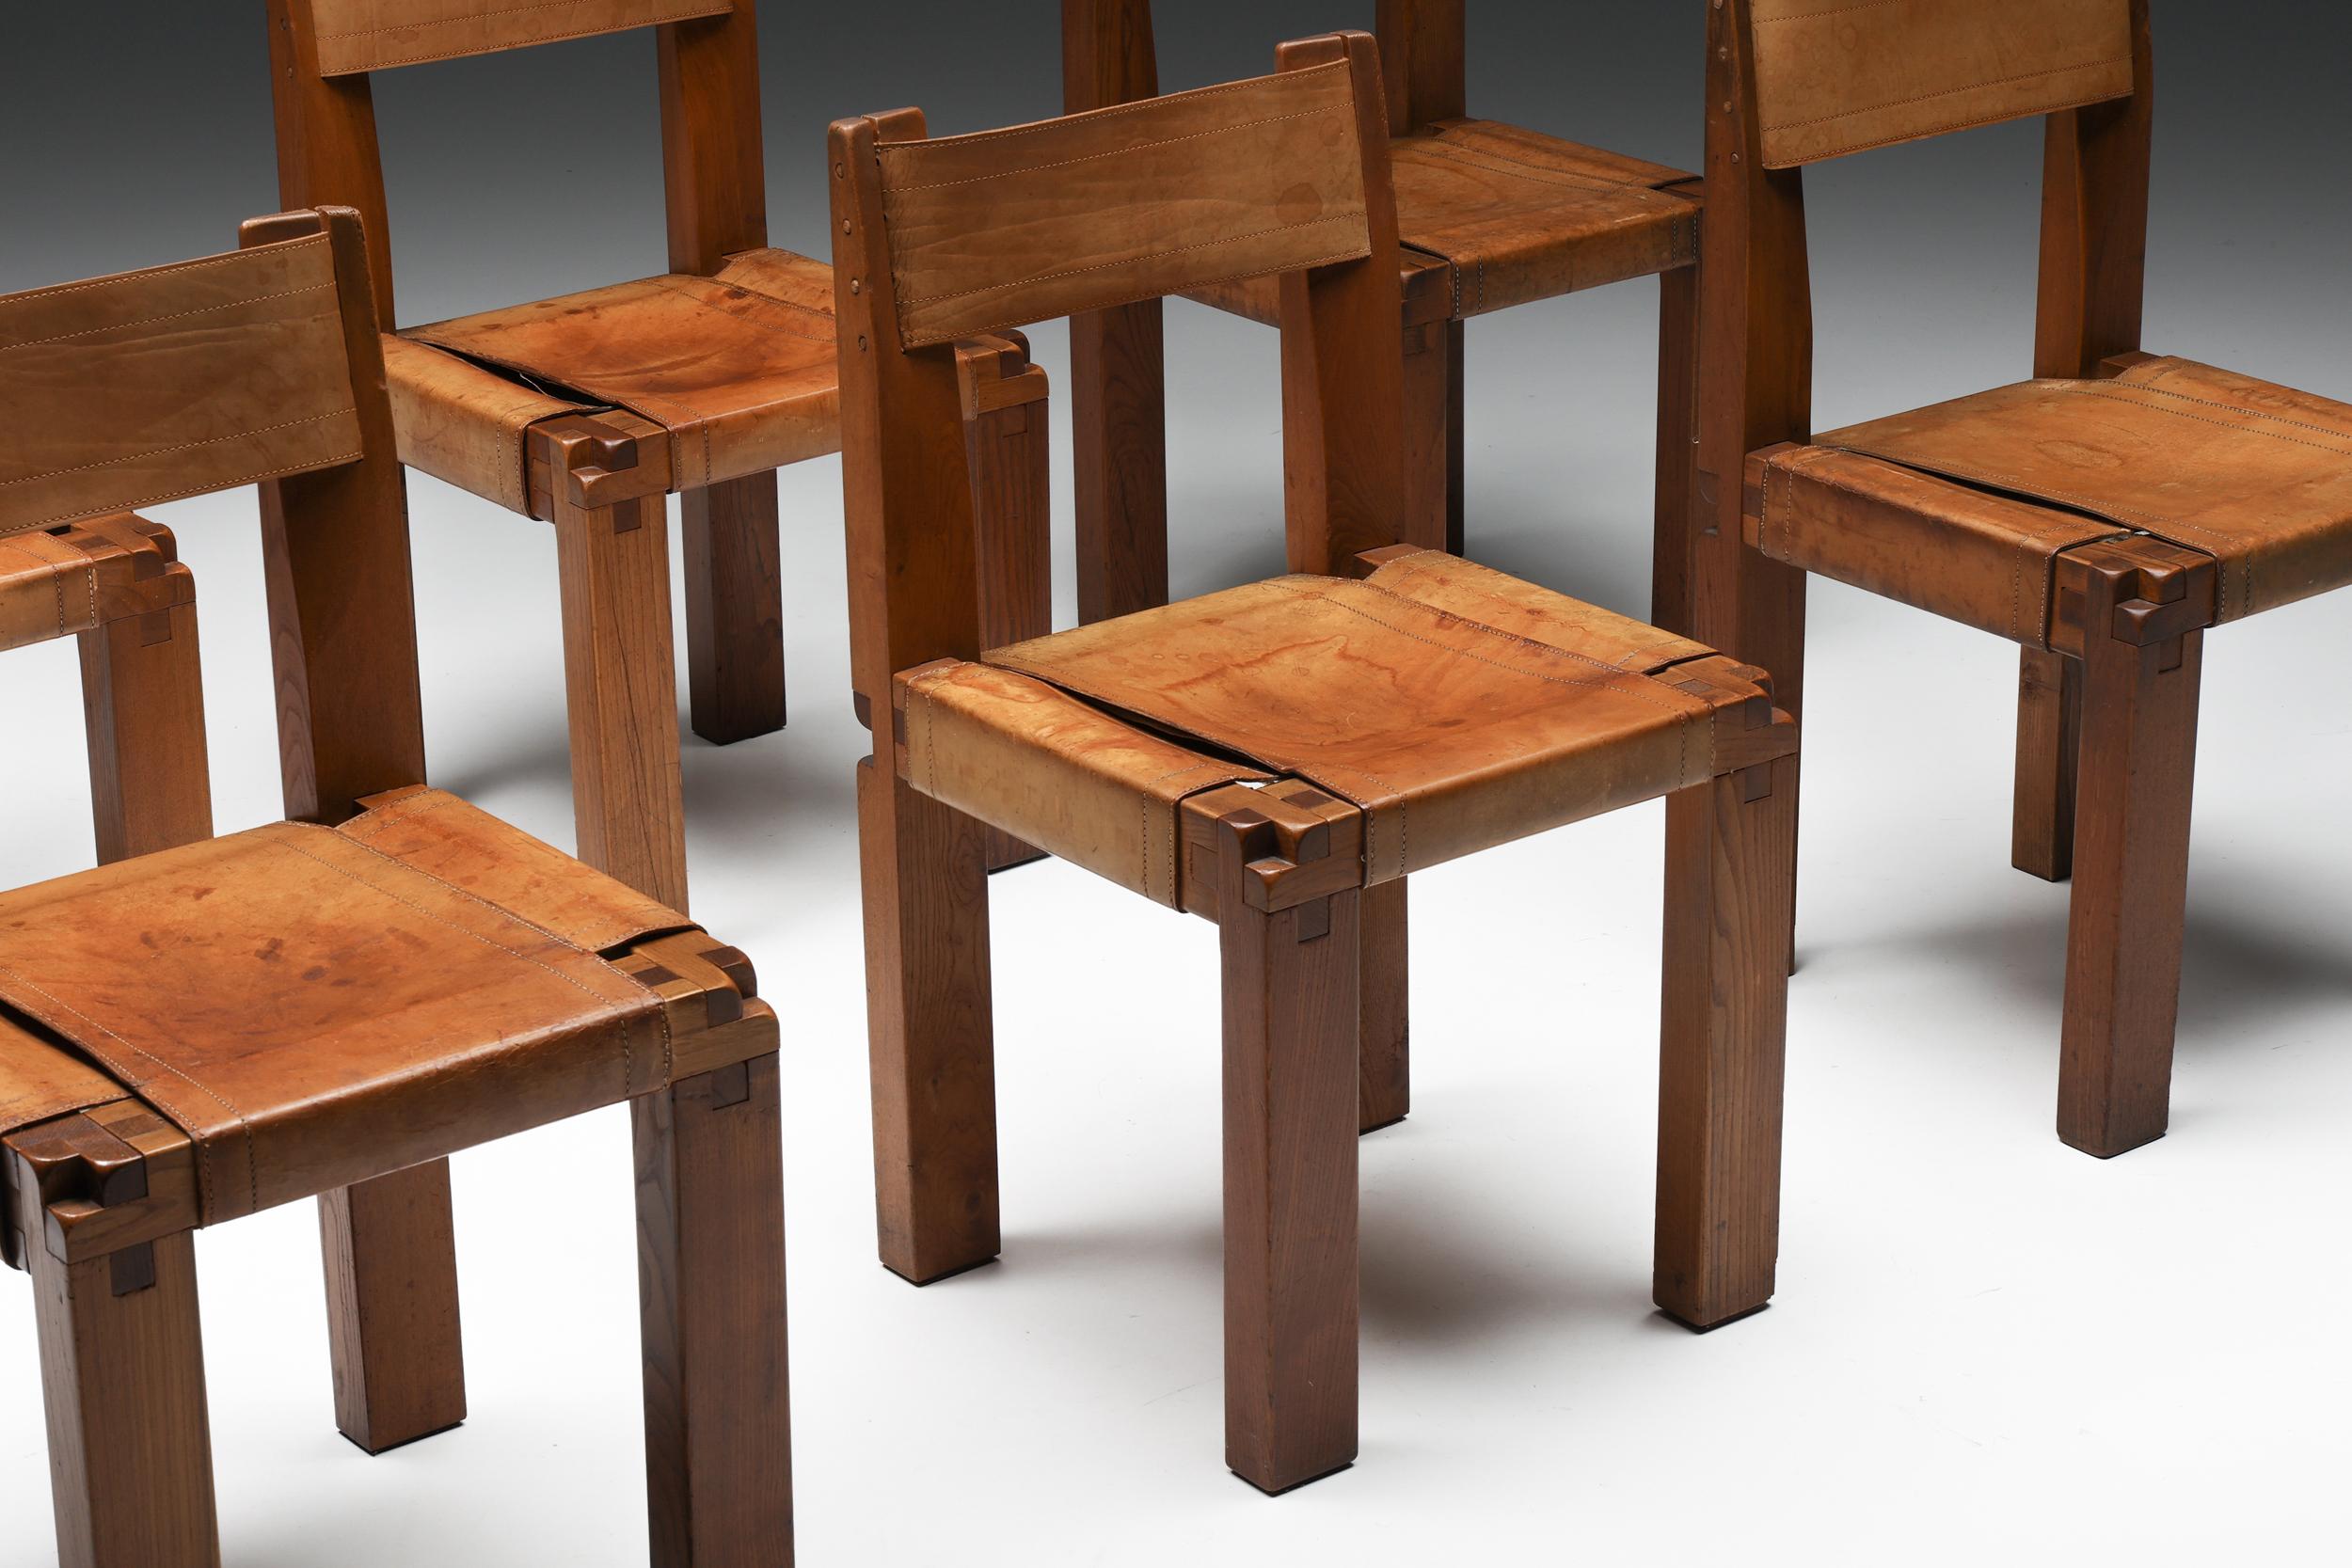 Pierre Chapo; S11 dining chairs; Solid Elm; Leather; 1960's; France; 

Pierre Chapo S11 solid elm and leather dining chairs were designed in the 1960s in France. These chairs have a cubic design of solid elmwood with a natural leather back and